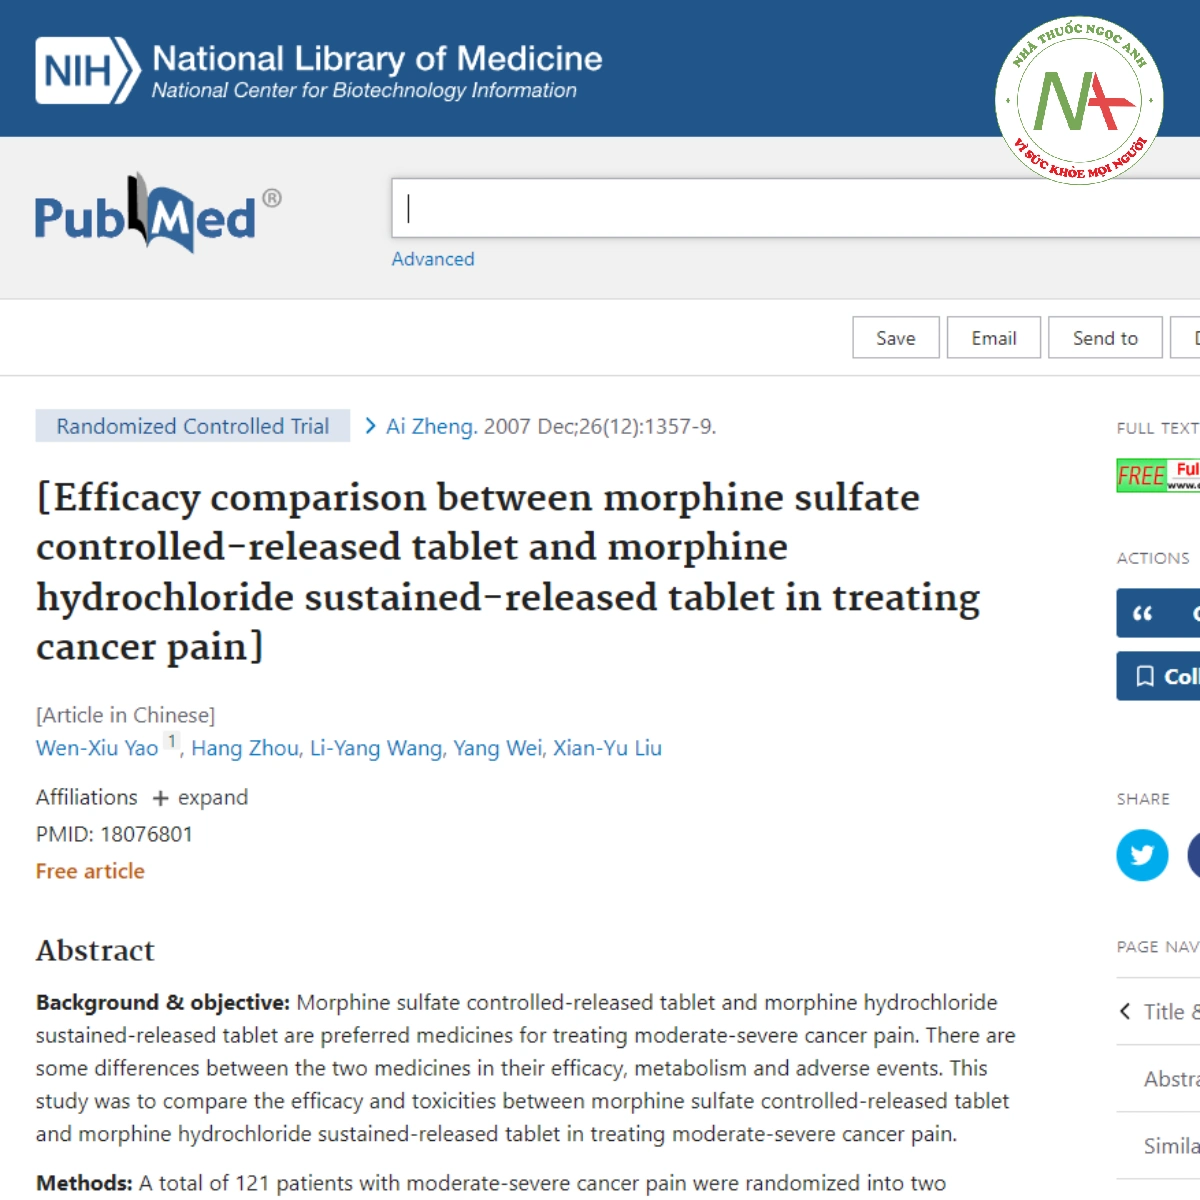 Efficacy comparison between morphine sulfate controlled-released tablet and morphine hydrochloride sustained-released tablet in treating cancer pain